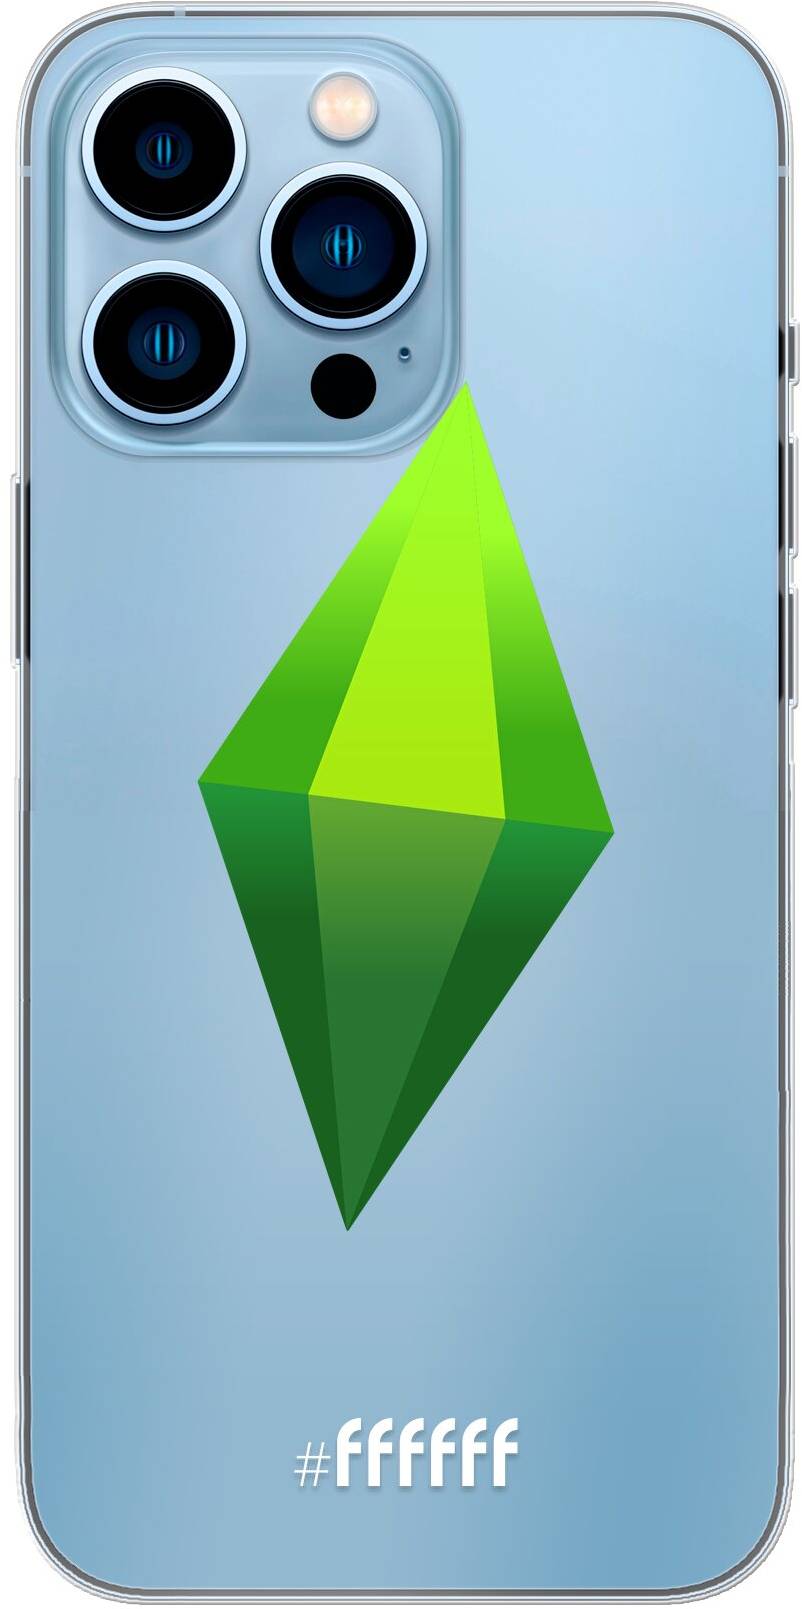 The Sims iPhone 13 Pro